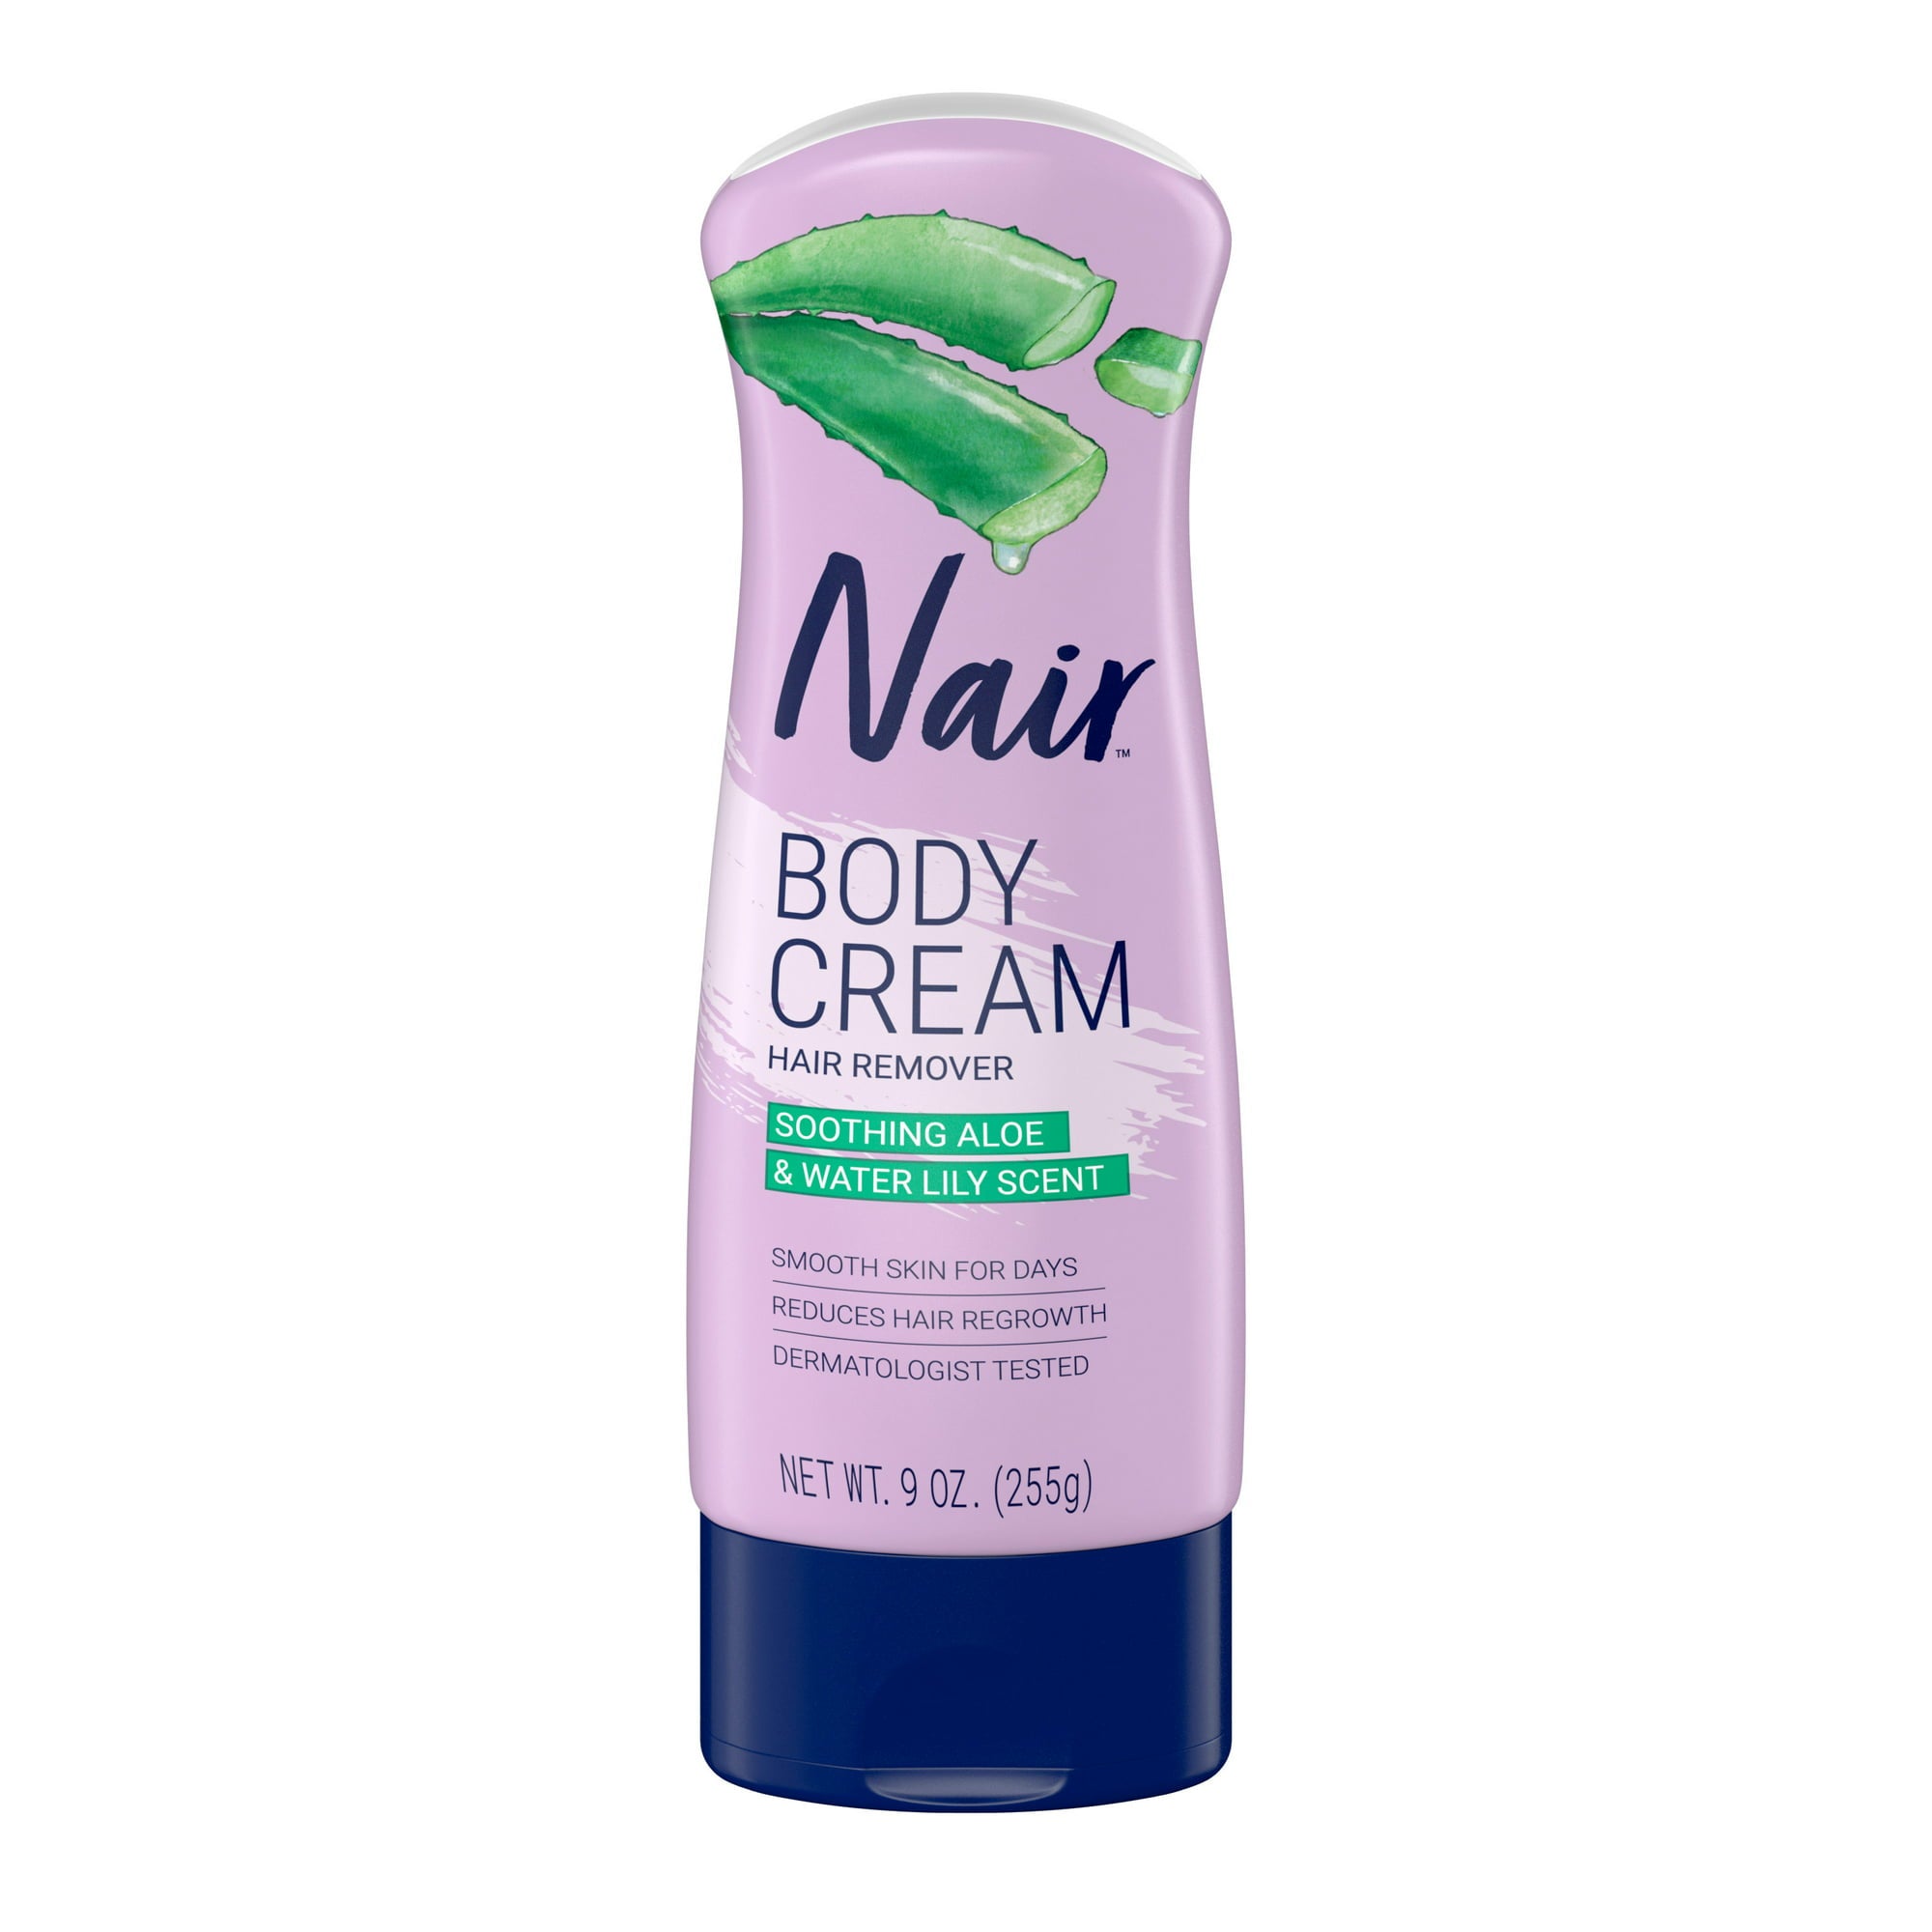 Nair Hair Removal Body Cream With Aloe and Water Lily Leg and Body Hair Remover 9 Oz Bottle